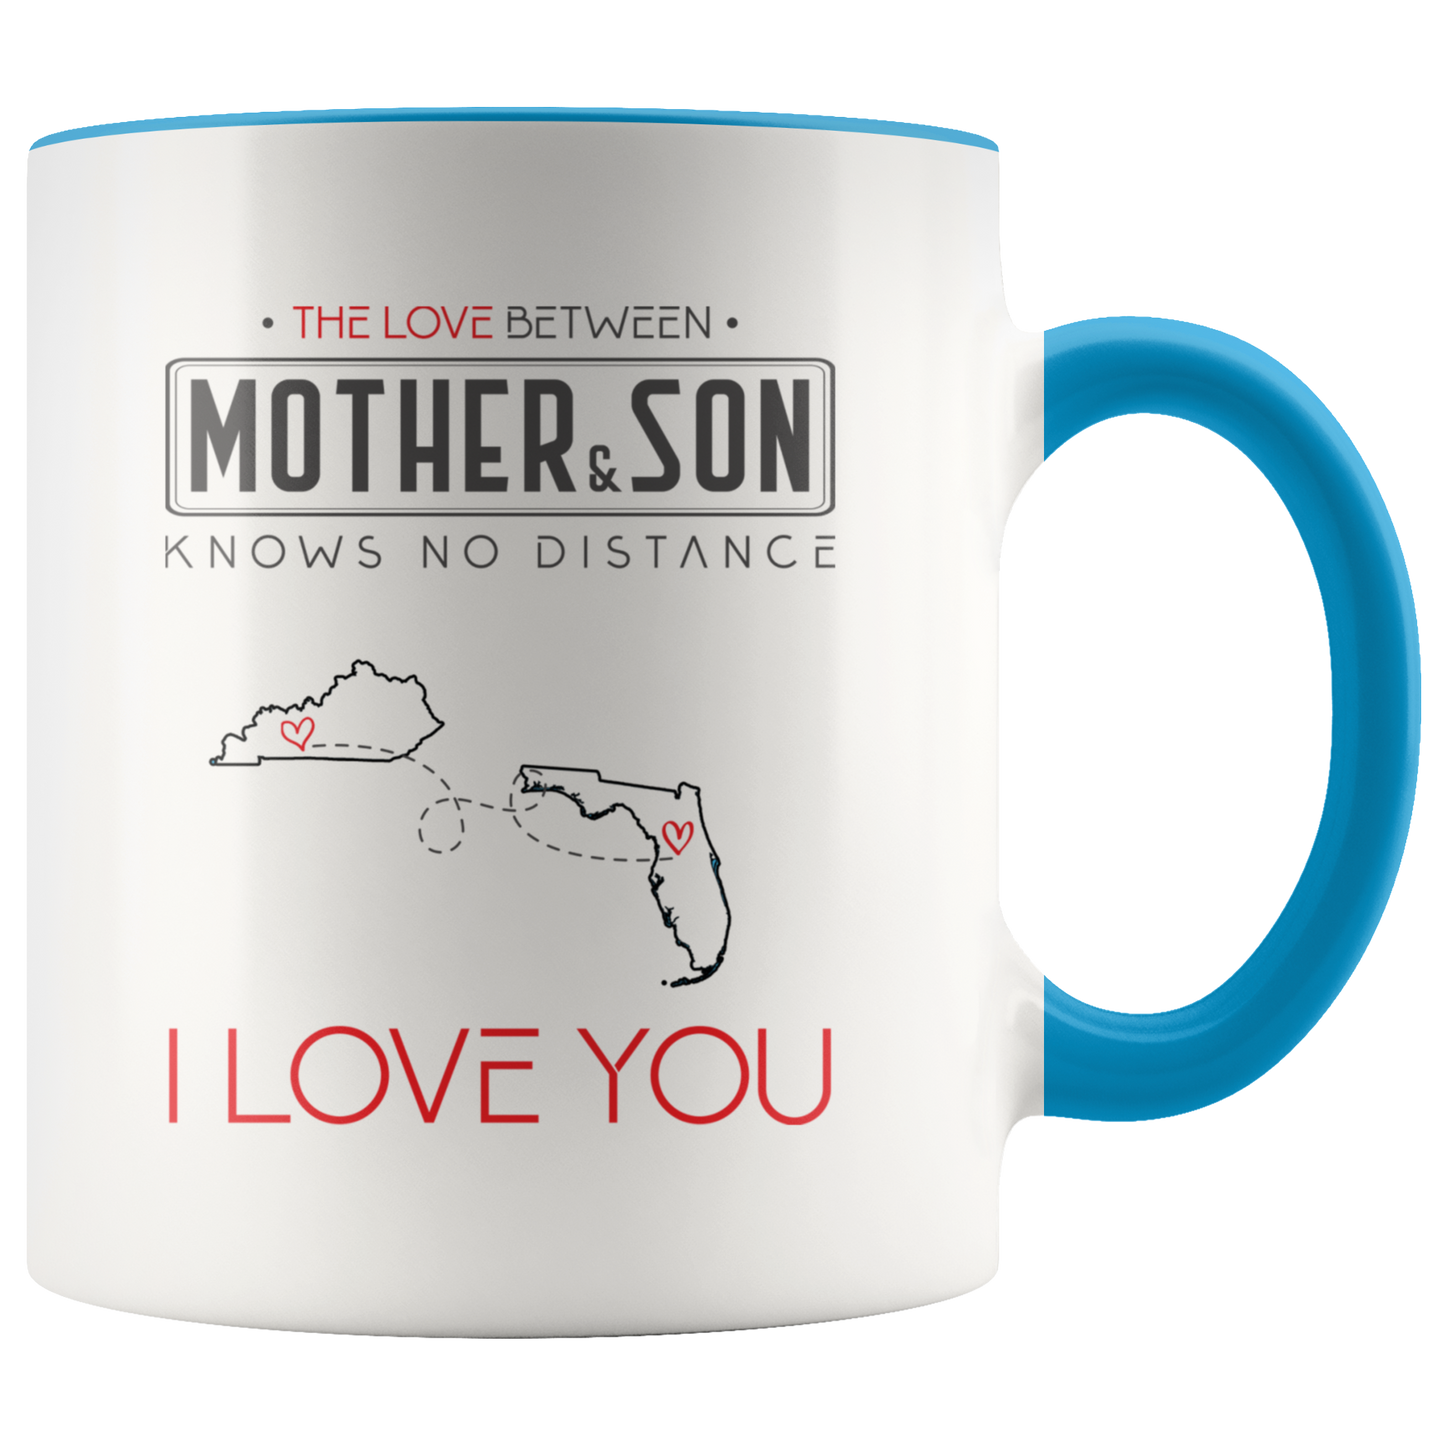 cust_80801_8141-sp-23570 - [ Kentucky | Florida ]Mother And Son Mug 11 oz - The Love Between Mother And Son K